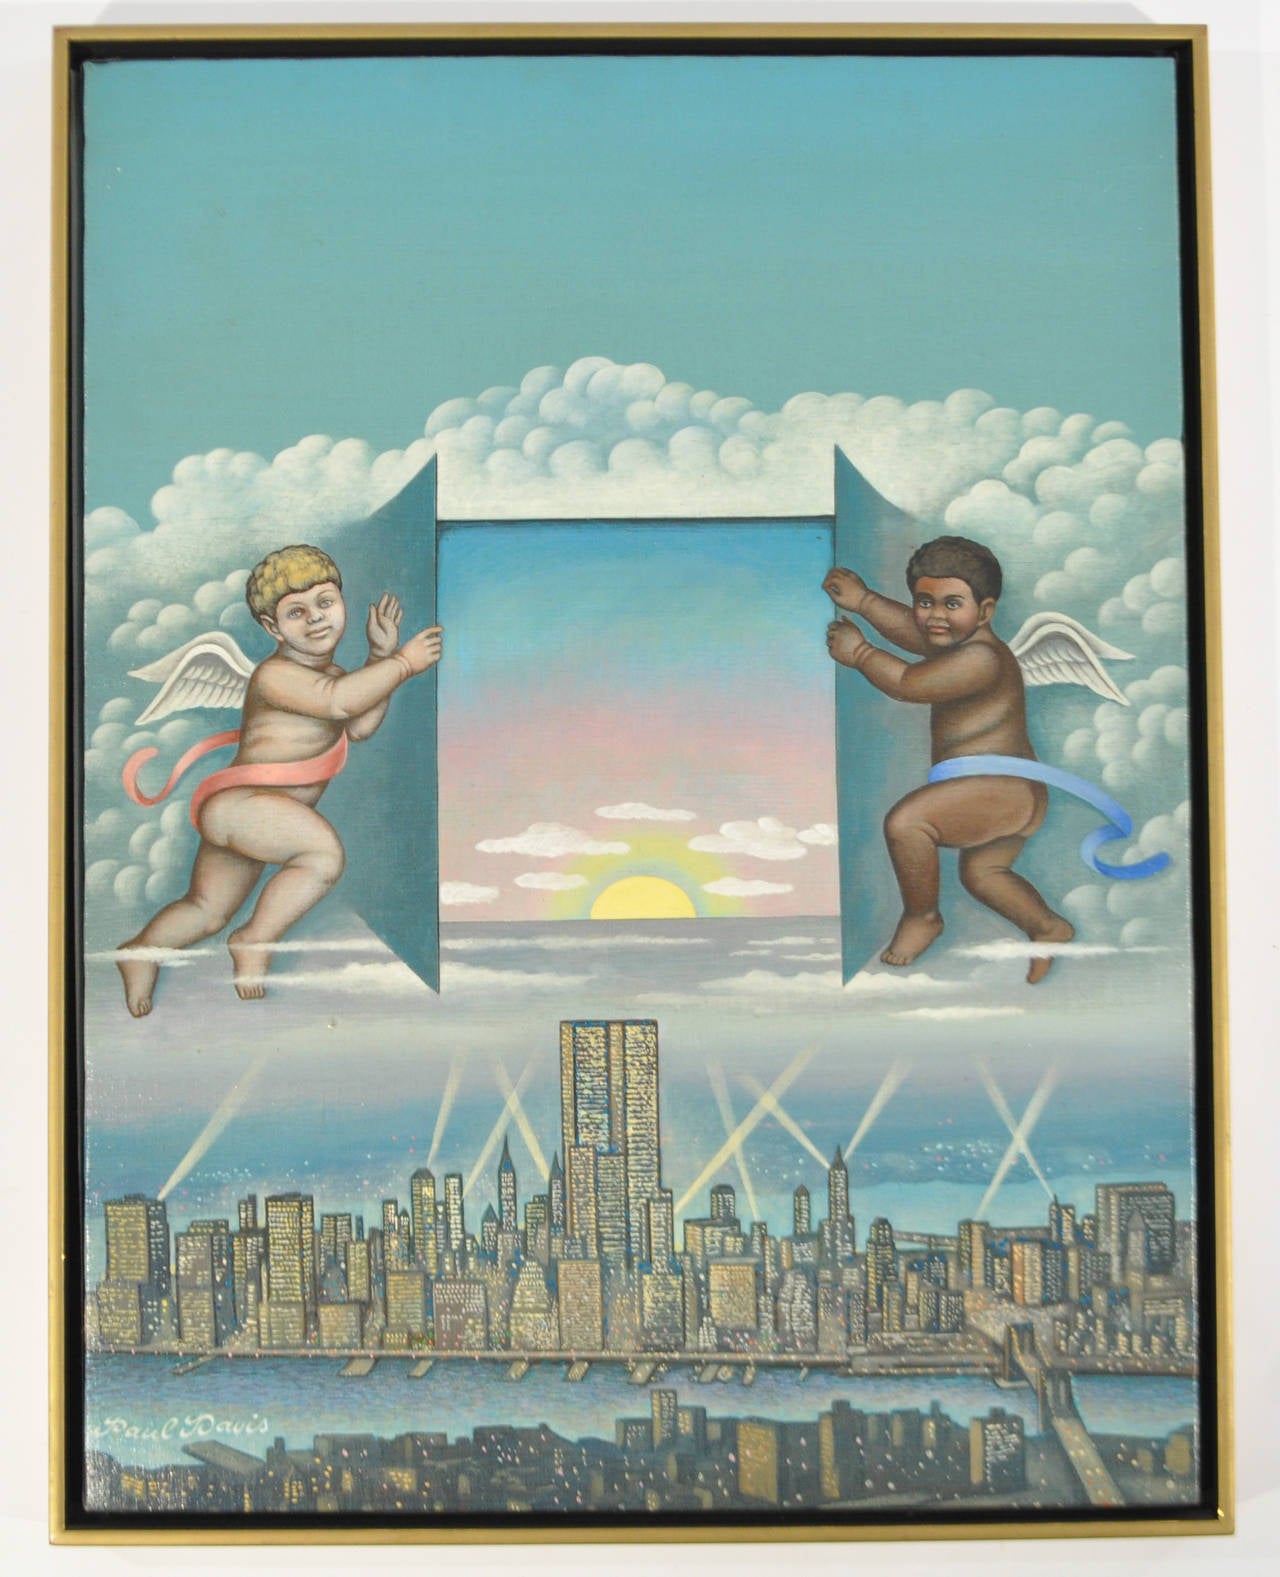 A fantastic oil on canvas with a strong sense of imagery. Featuring two angels opening up the sunrise over Manhattan with spotlights searching the skies above. The piece is signed Paul Davis to the lower left.

Paul Davis (American, b. 1938) is an